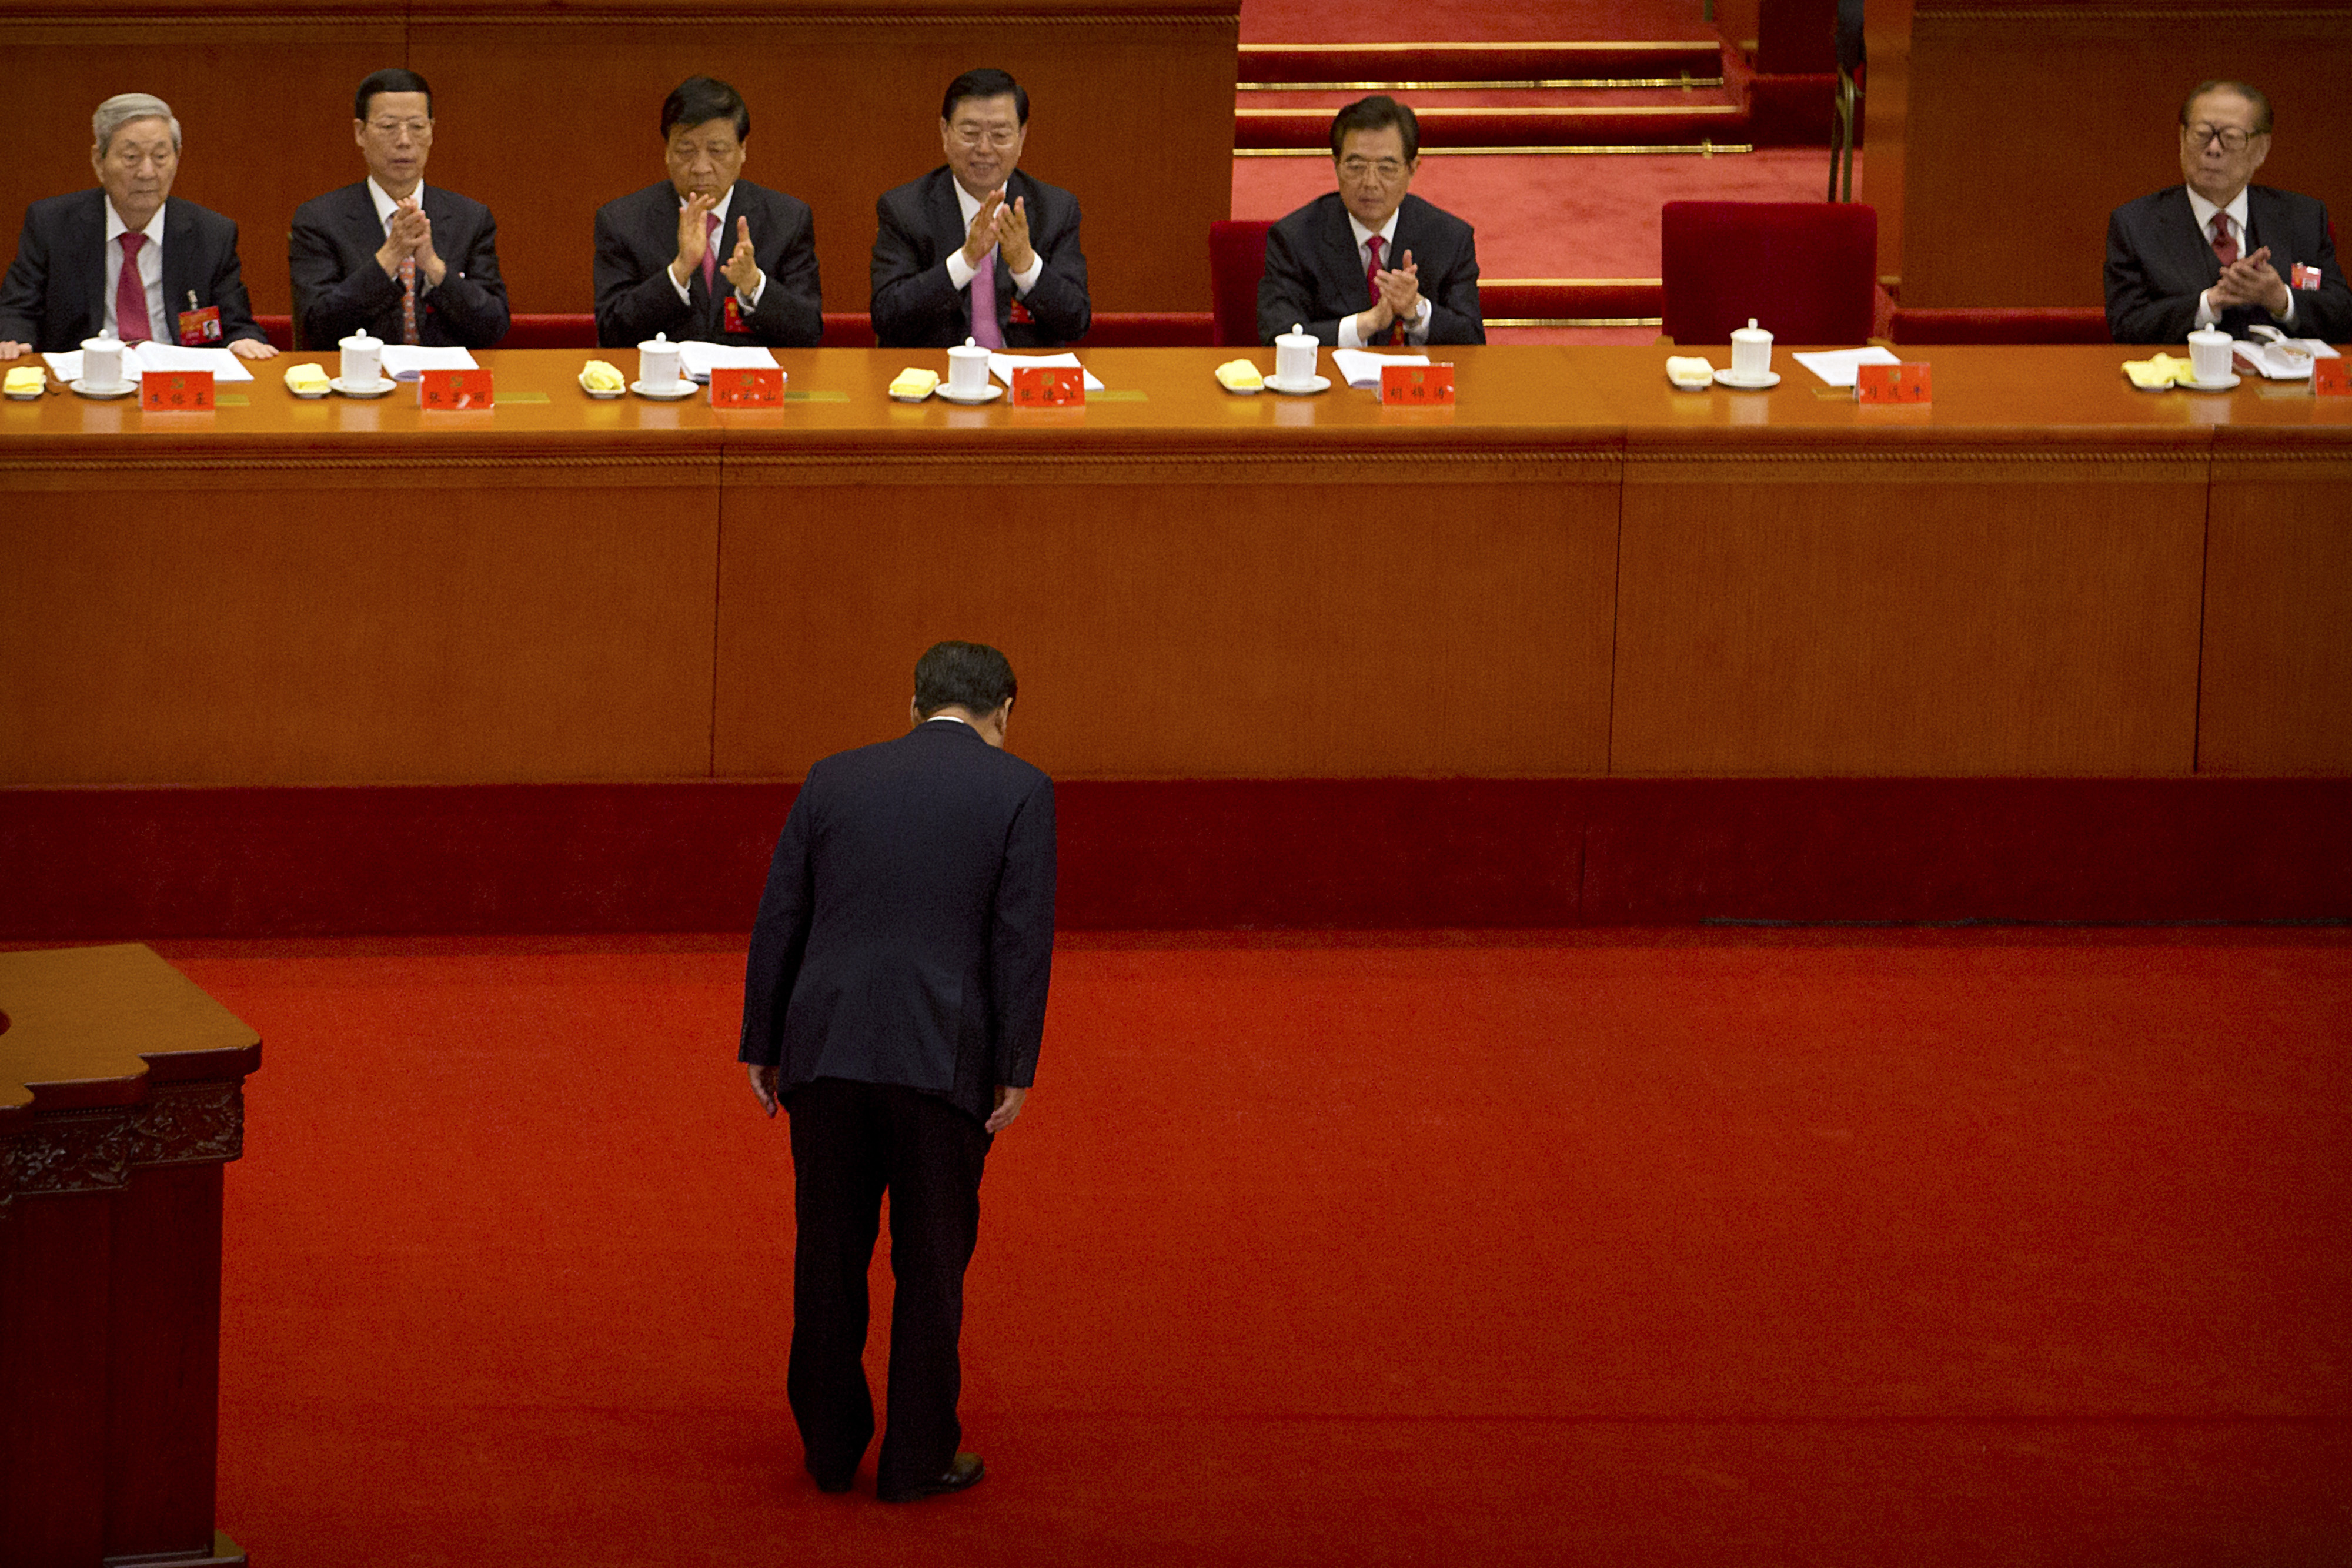 Chinese President Xi Jinping bows to current and former Chinese leaders, from left, former Premier Zhu Rongji, Politburo Standing Committee members Zhang Gaoli, Liu Yunshan, and Zhang Dejiang, former Chinese President Hu Jintao, and former Chinese President Jiang Zemin after giving a speech during the opening session of China's 19th Party Congress at the Great Hall of the People in Beijing, Wednesday, Oct. 18, 2017. Xi on Wednesday urged a reinvigorated Communist Party to take on a more forceful role in society and economic development to better address 